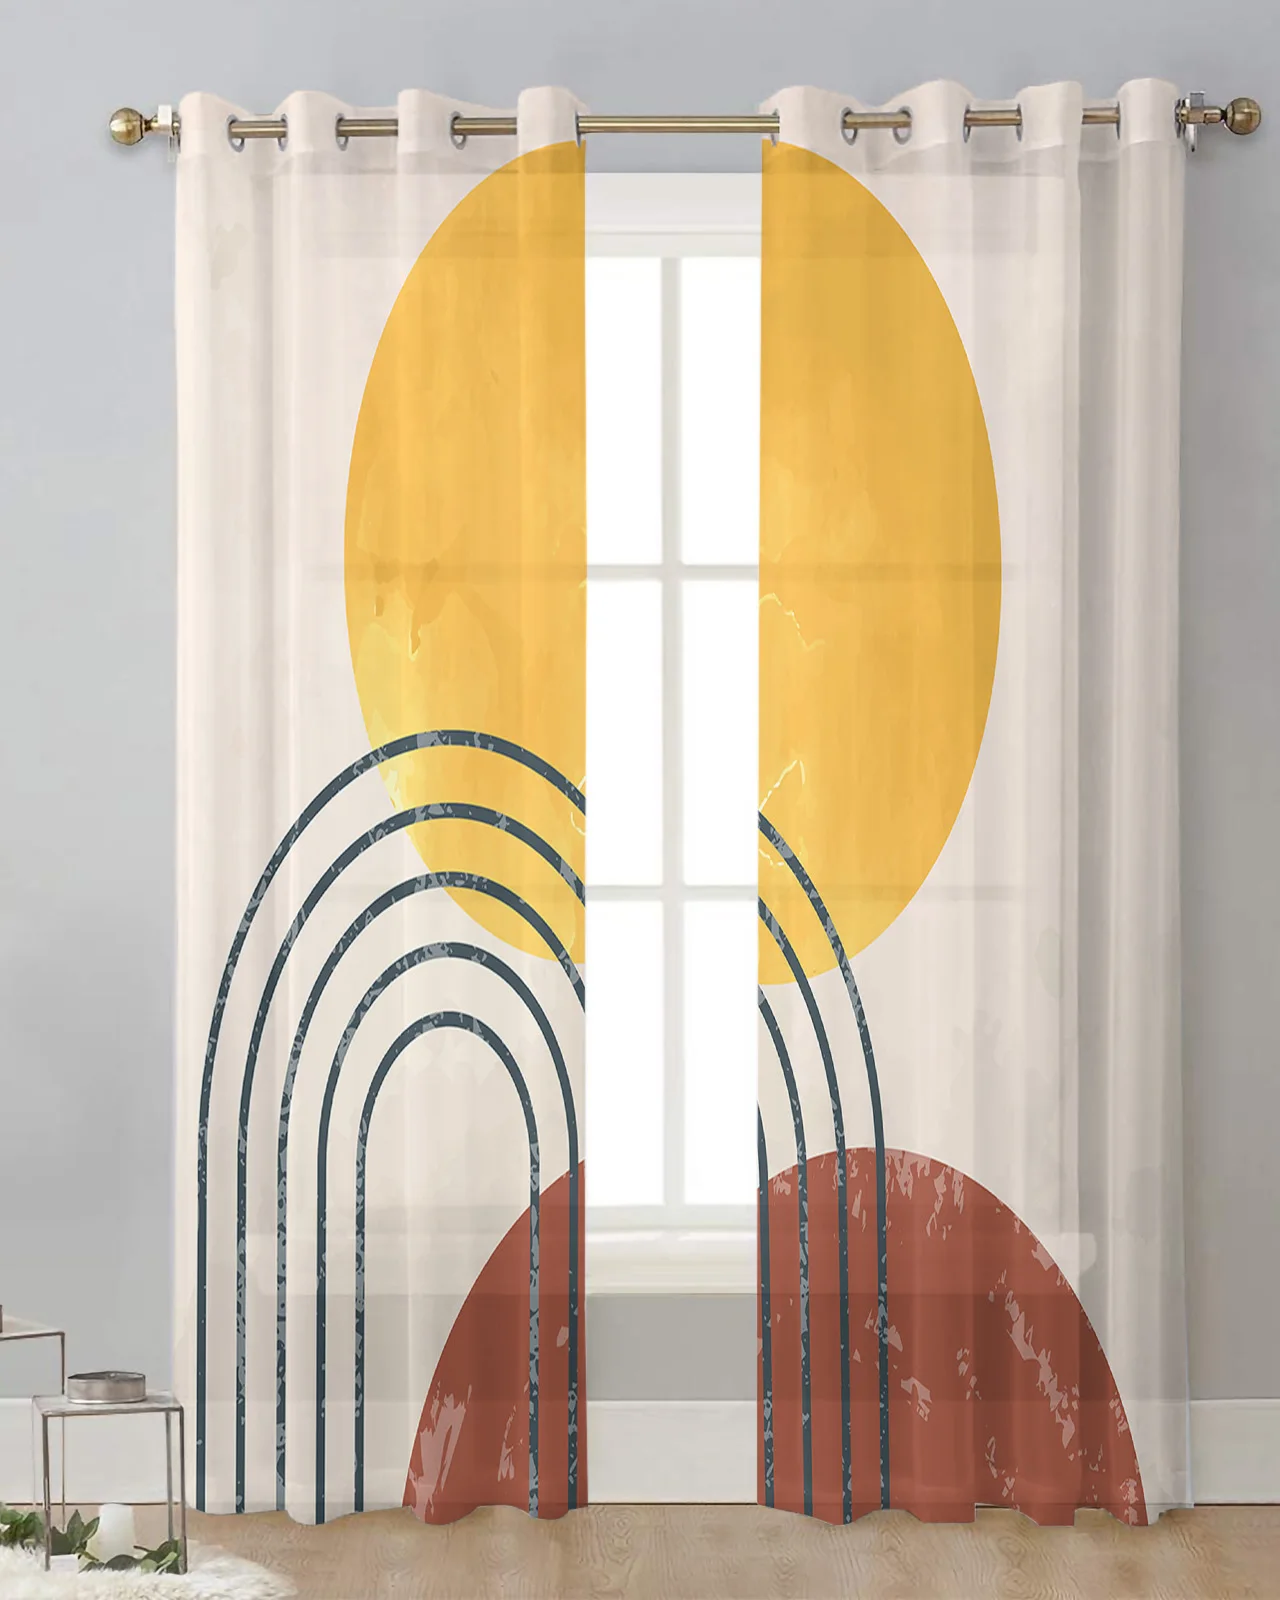 

Abstract Art Sun Lines Bedroom Organza Voile Curtain Window Treatment Drapes Tulle Curtains for Living Room Sheer Curtains